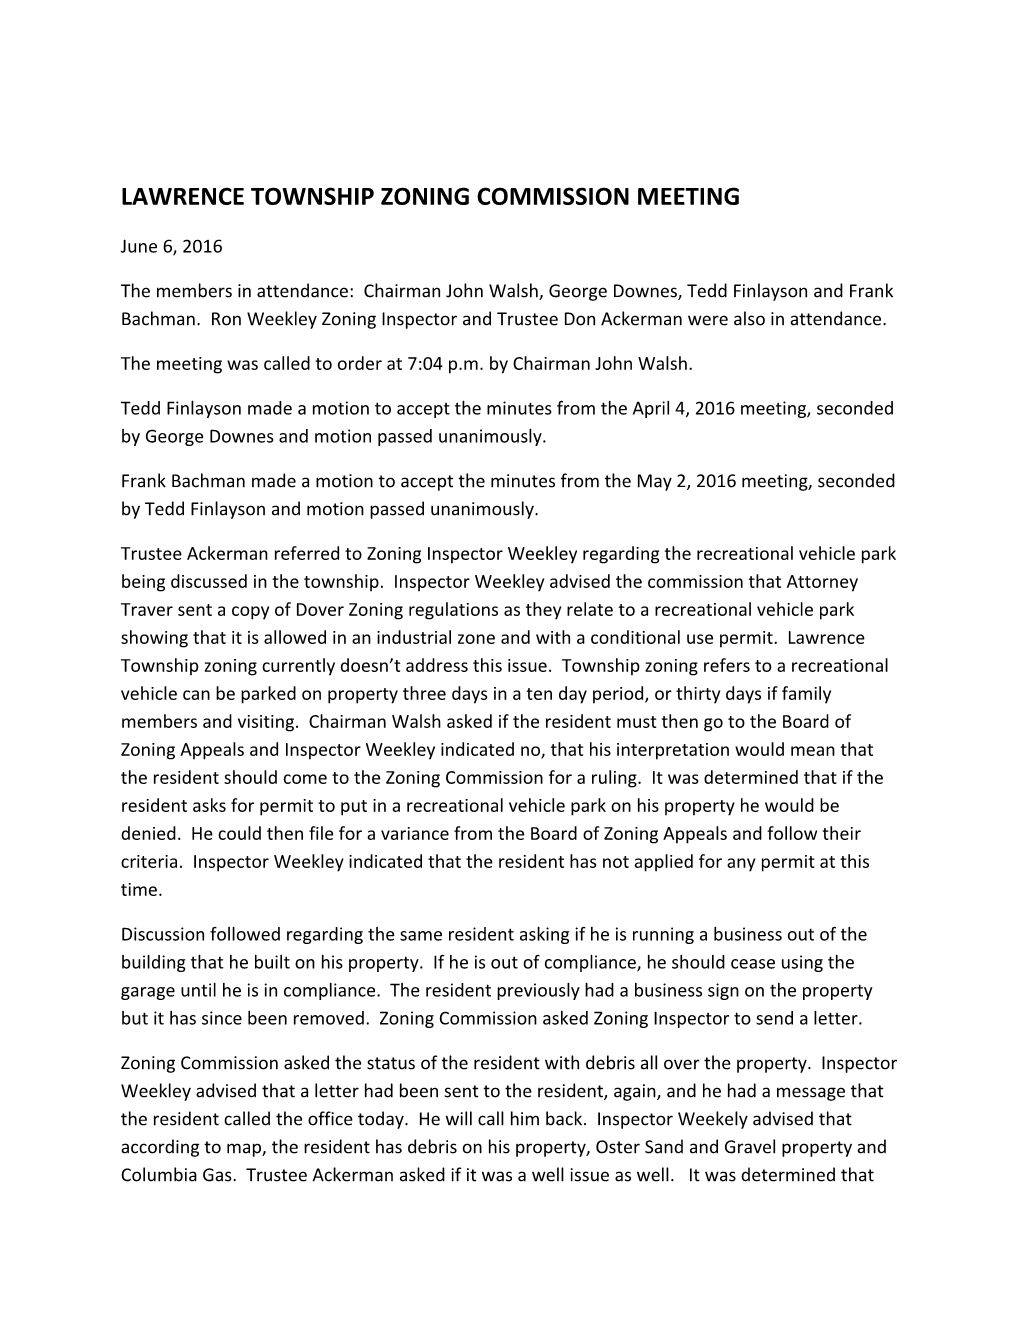 Lawrence Township Zoning Commission Meeting